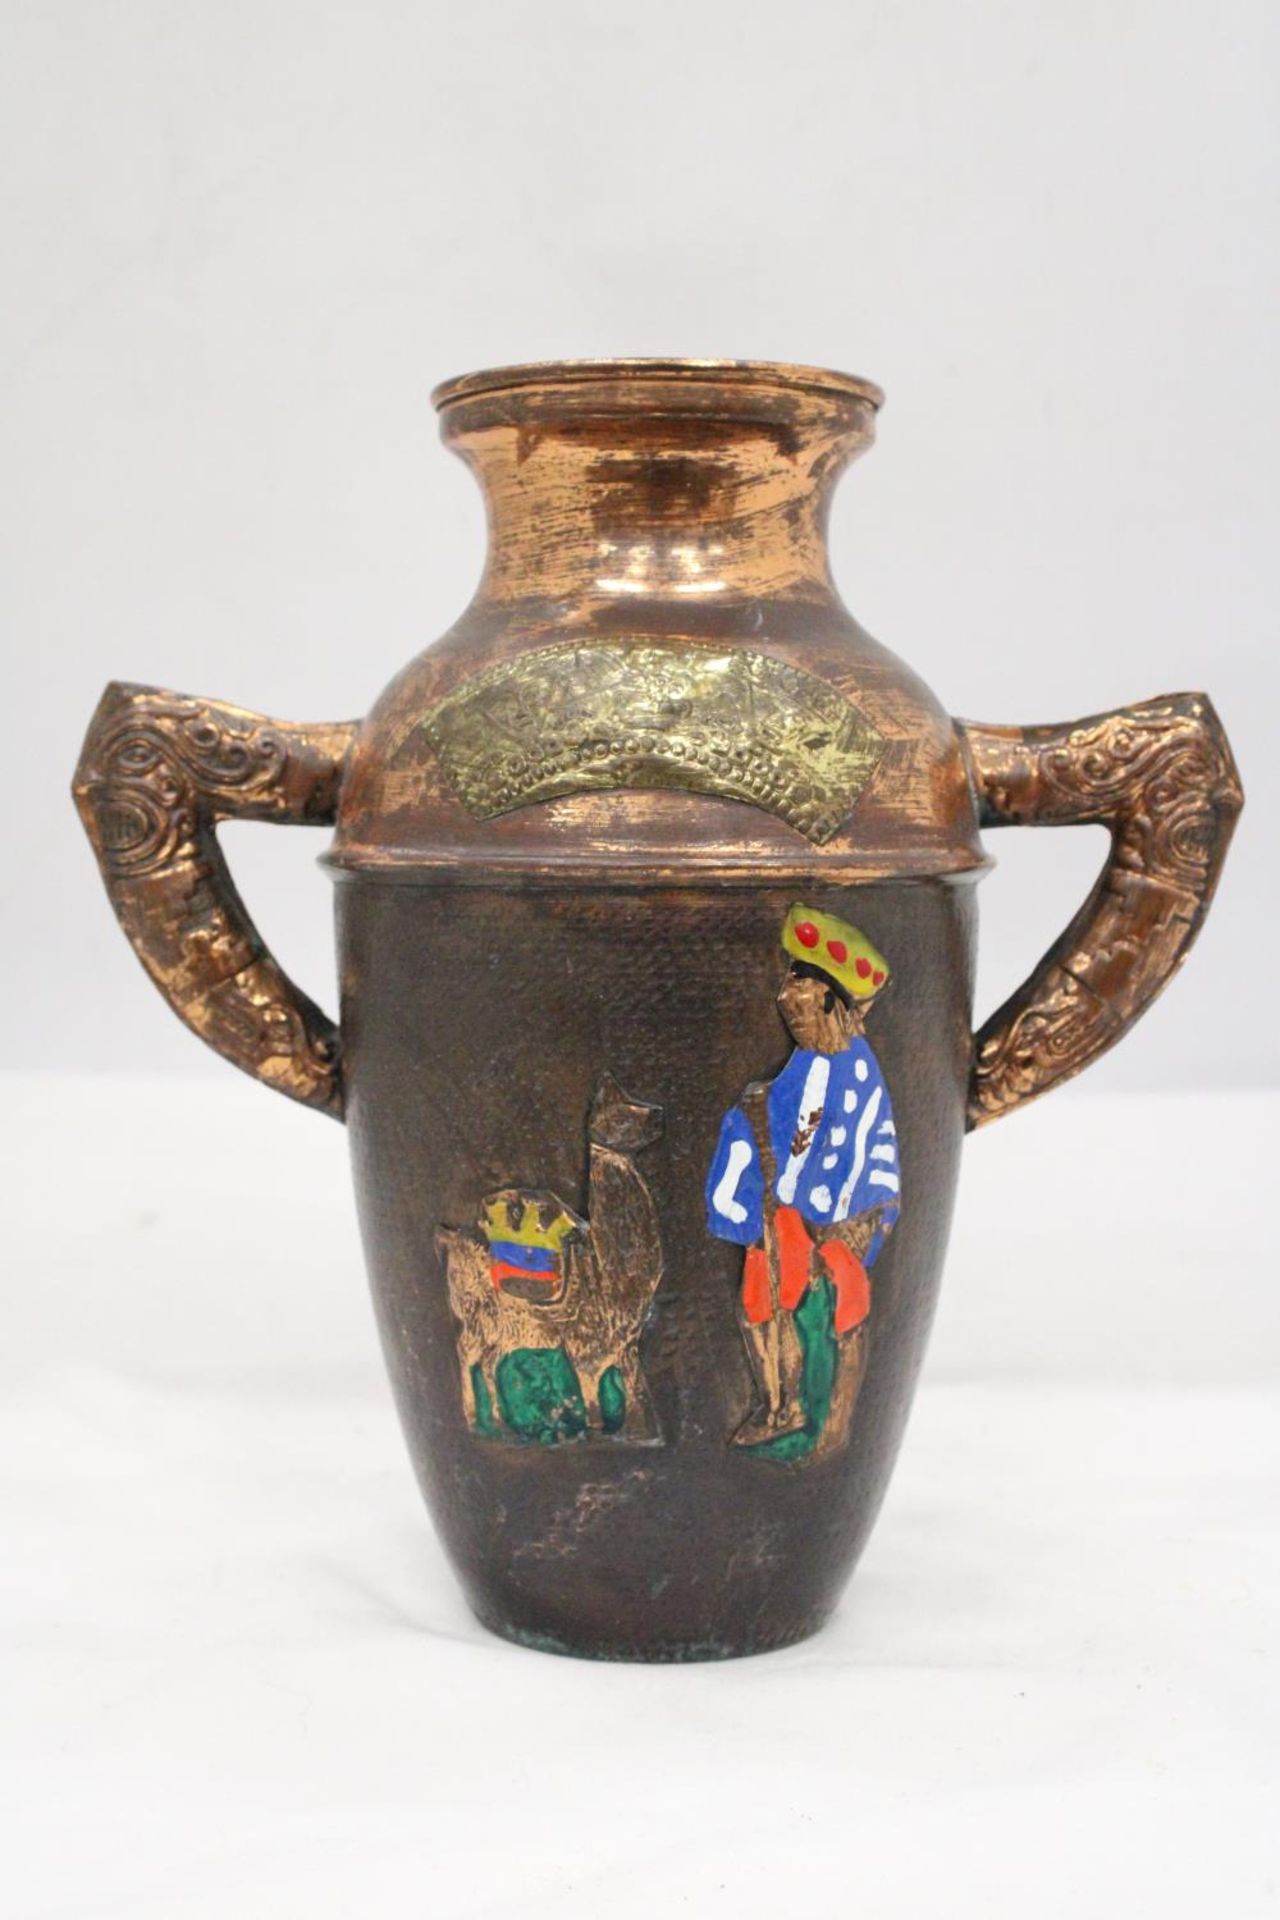 A VINTAGE COLOMBIAN MAYAN DECORATED COPPER VASE - Image 3 of 5